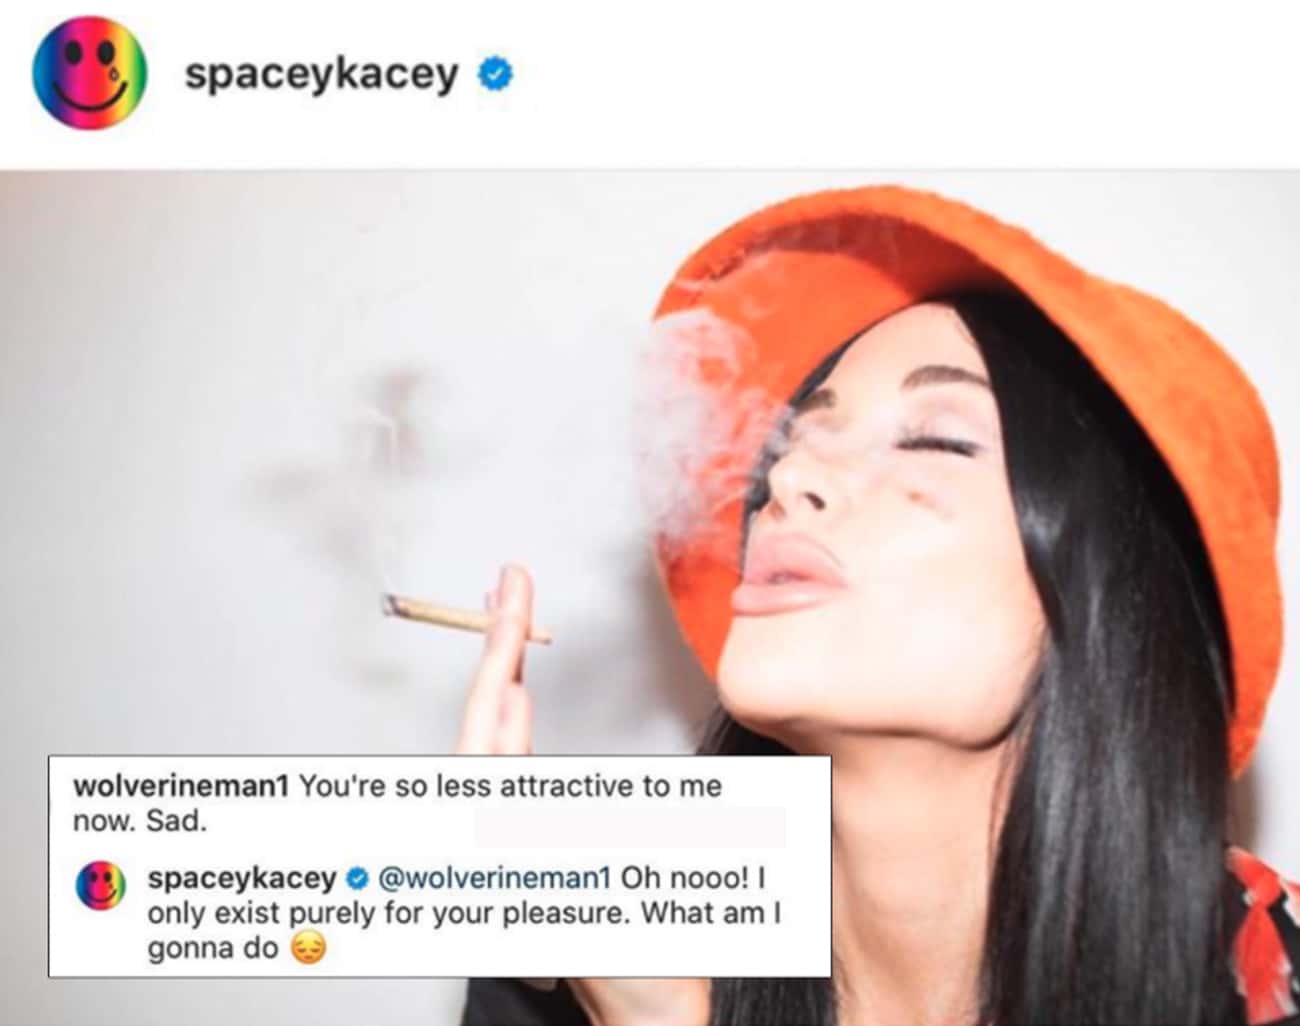 celebs savage replies - lip - spaceykacey wolverineman1 You're so less attractive to me now. Sad. spaceykacey Oh nooo! I only exist purely for your pleasure. What am I gonna do